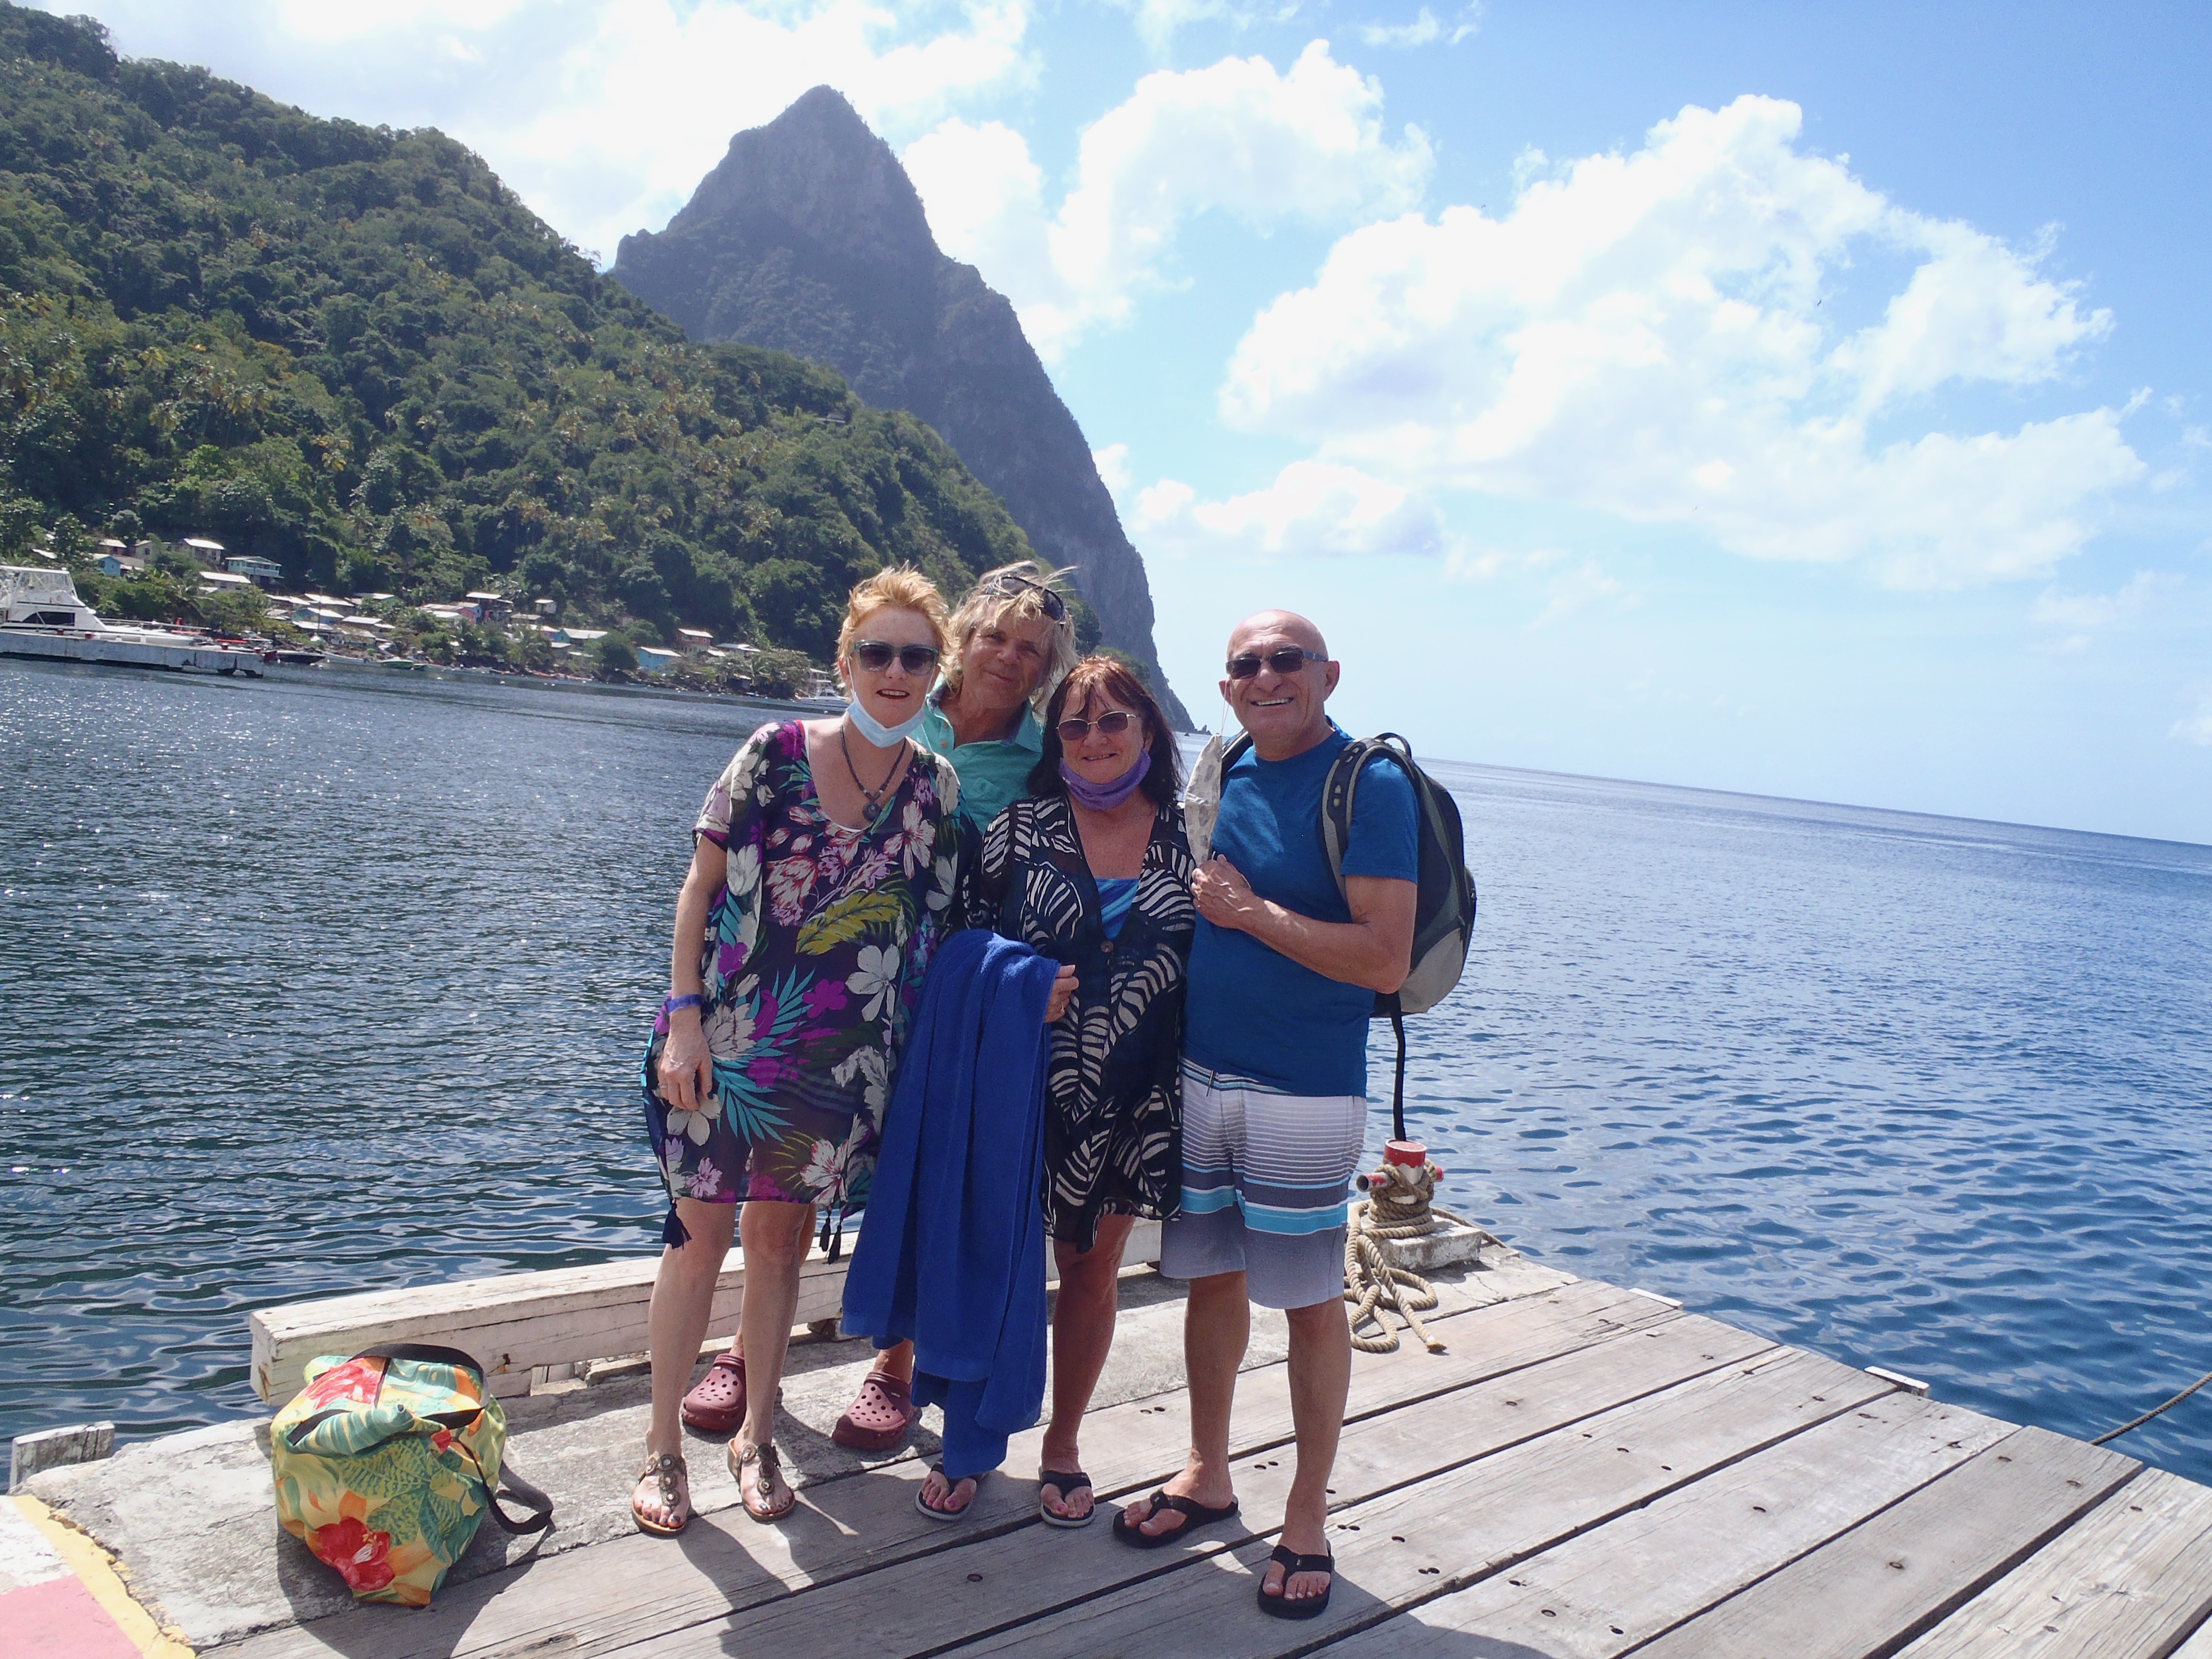 The Pitons at Saint Lucia...